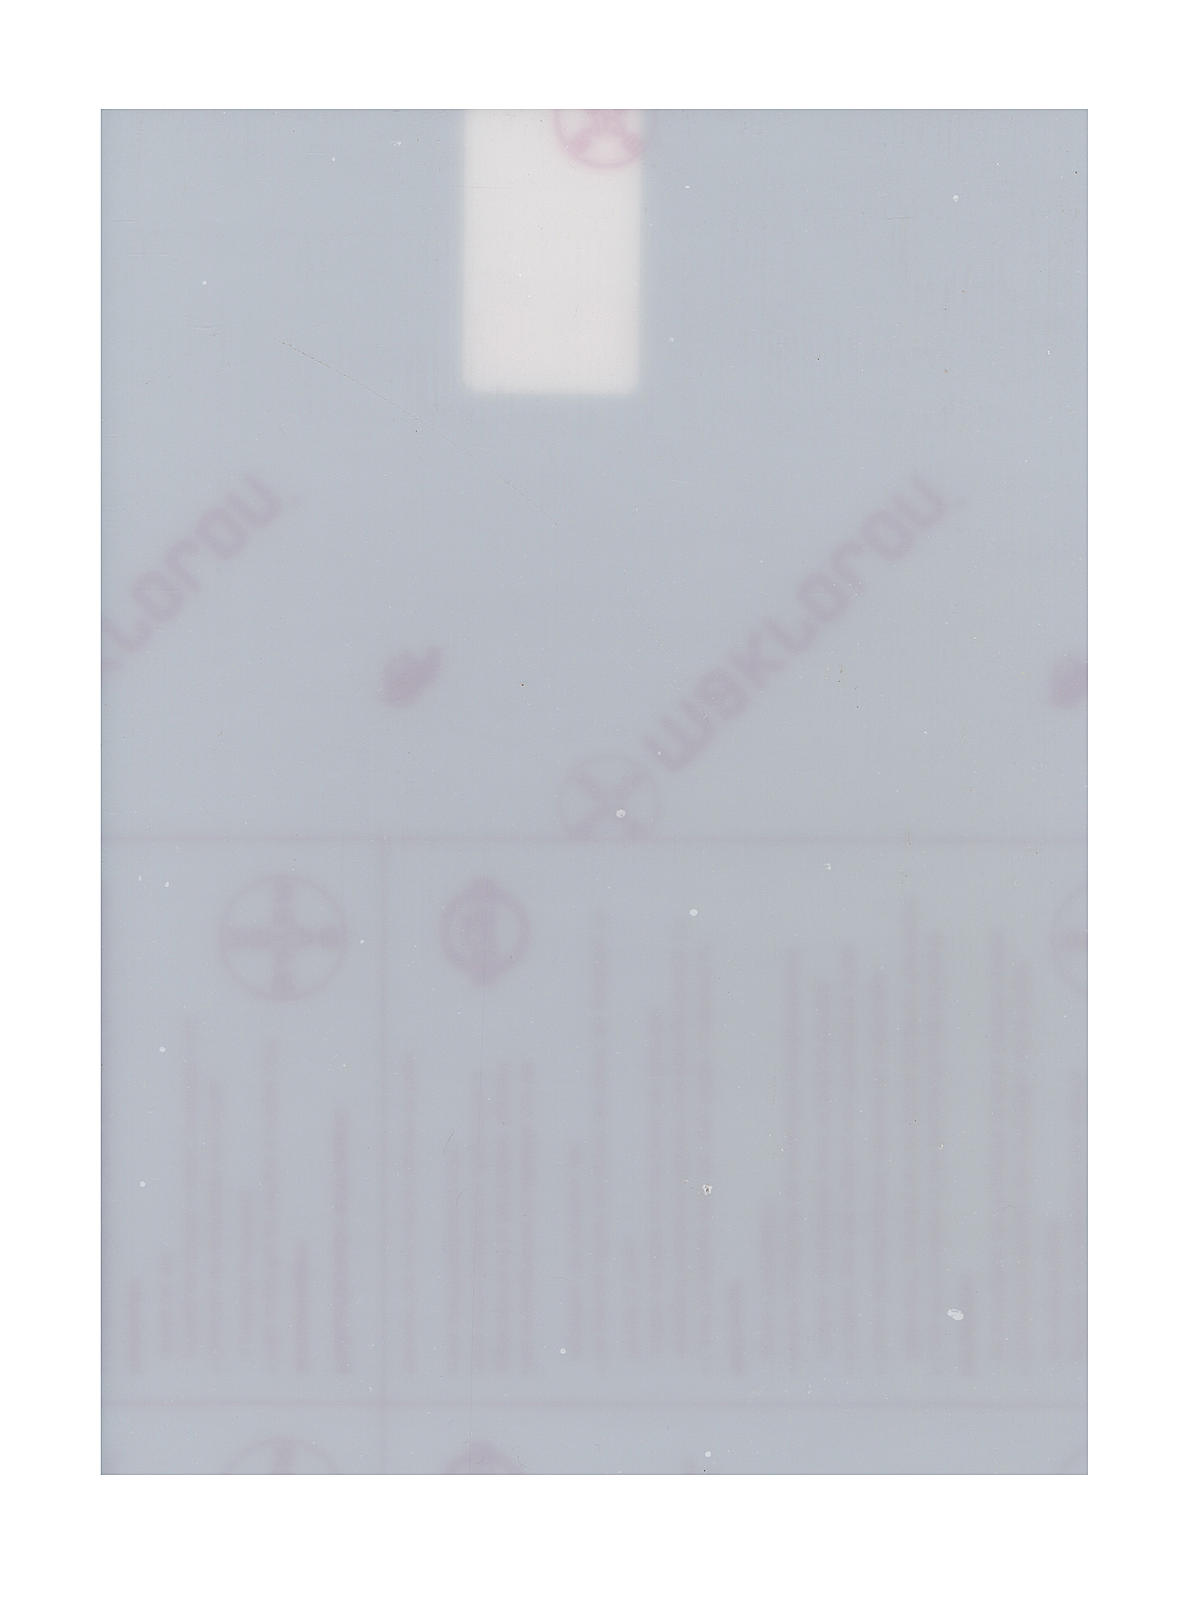 Clear Polycarbonate Sheets 0.0625 In. 1.58 Mm 12 In. X 24 In.